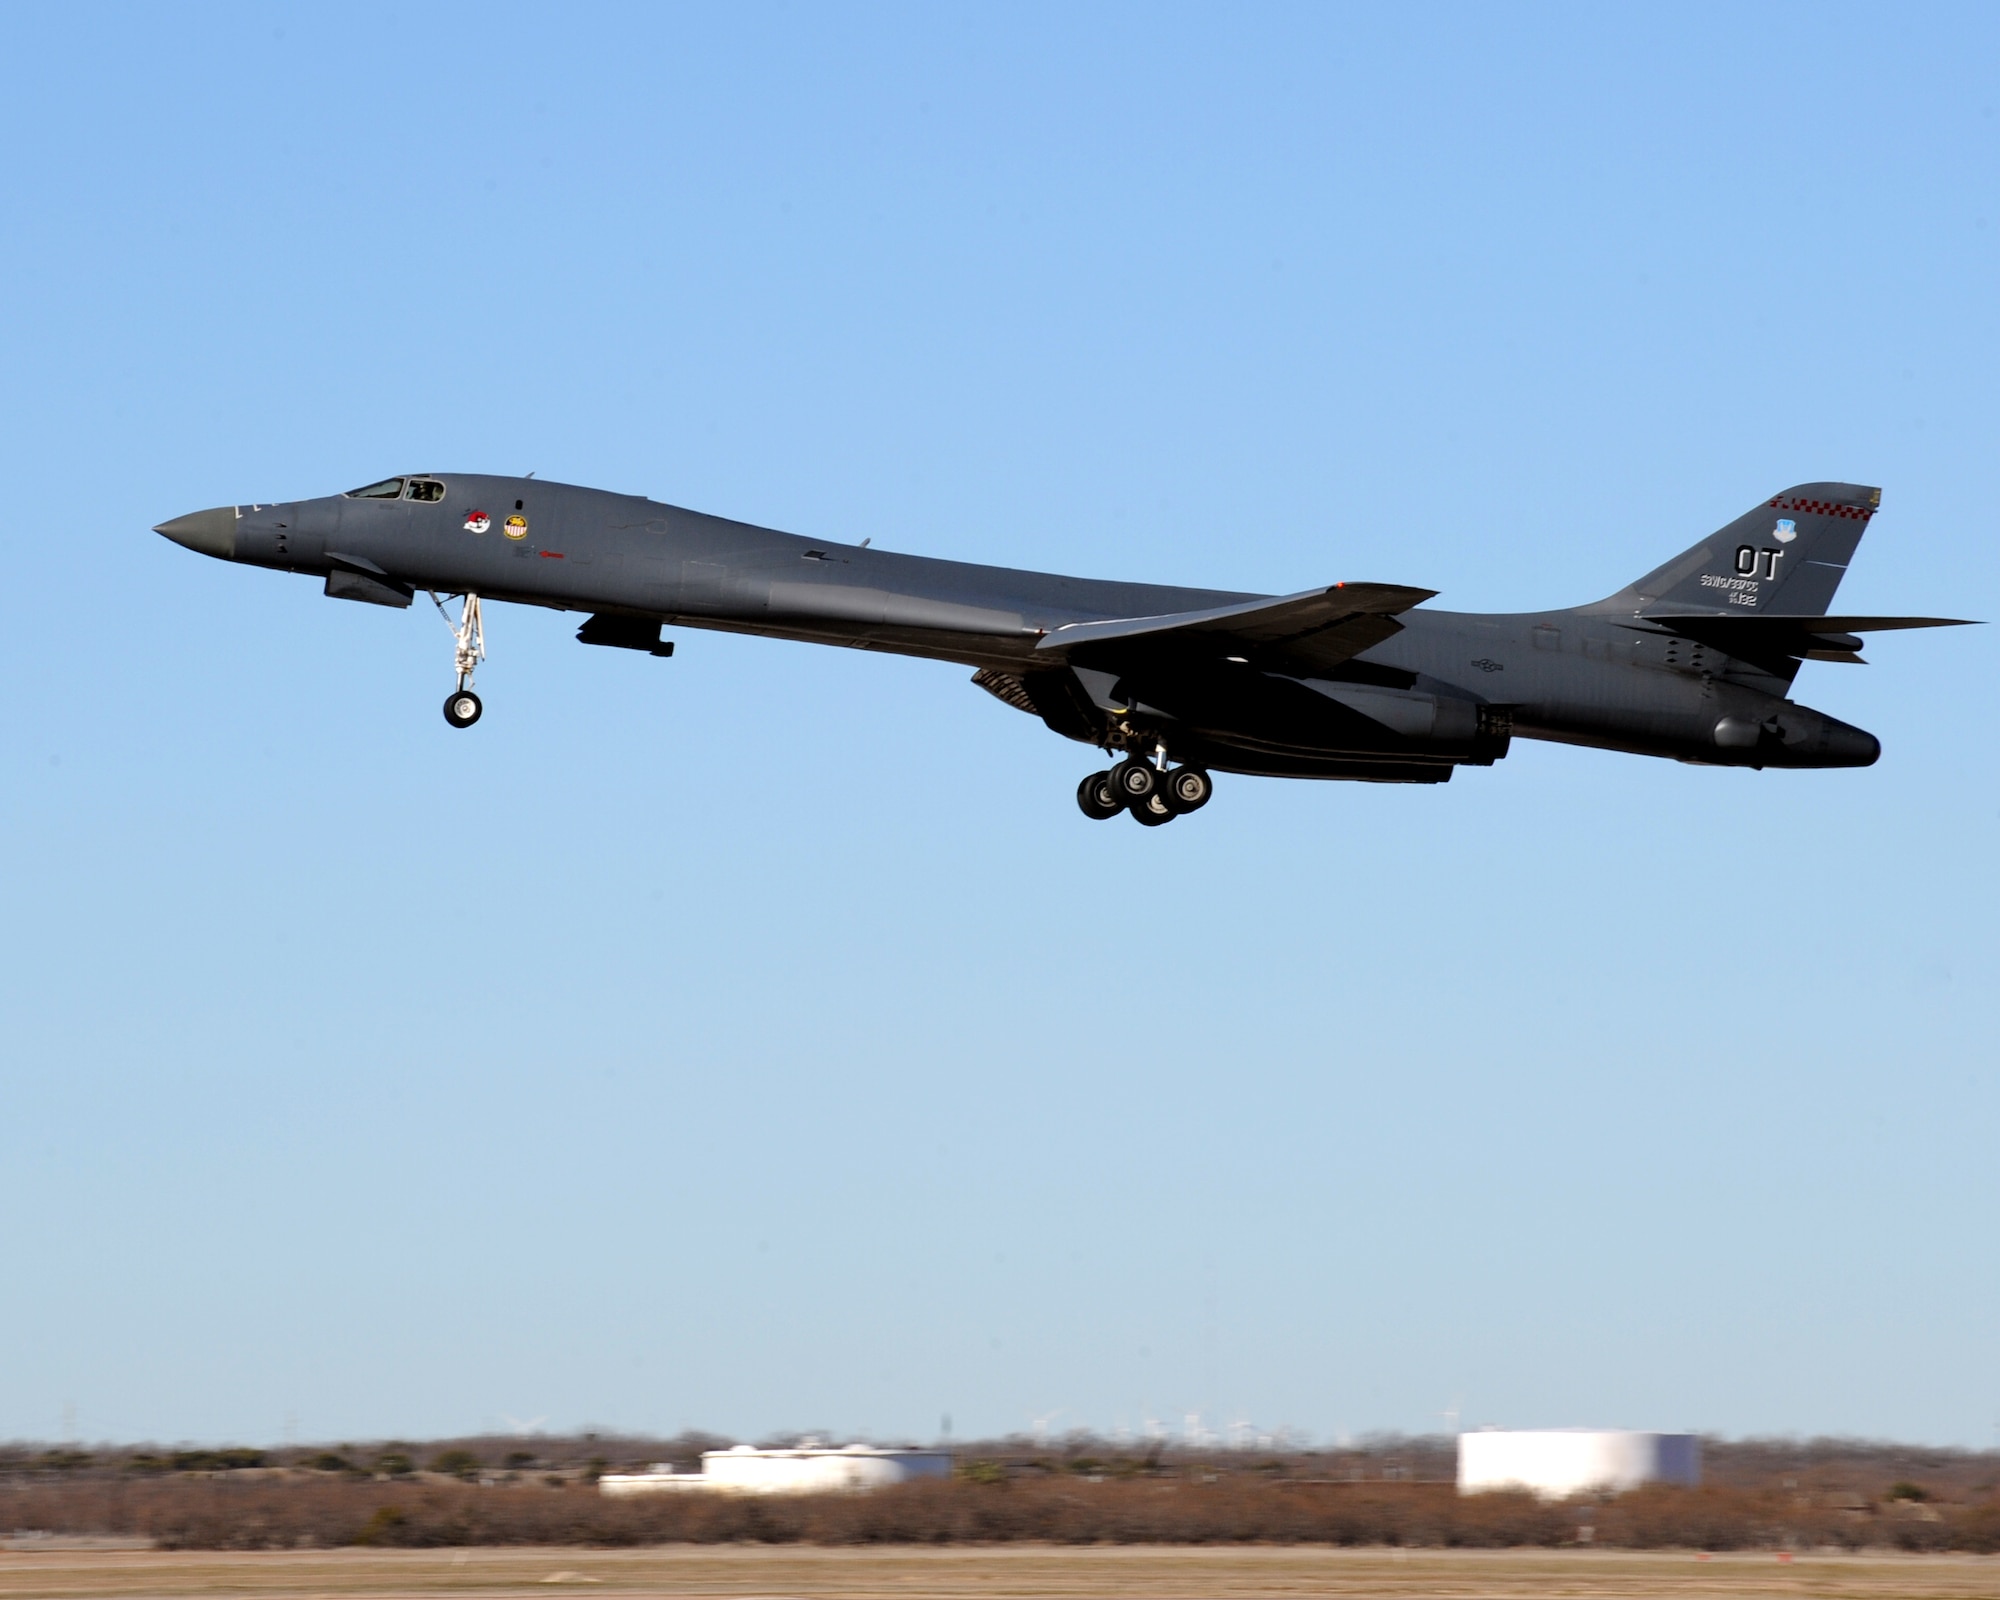 A 337th Test and Evaluation Squadron B-1 Bomber takes off carrying a BLU-129, Jan. 20, 2011, at Dyess Air Force, Texas. The BLU-129 is a 500-pound guided bomb designed with a composite warhead to destroy targets while causing the least amount of collateral damage. (U.S. Air Force photo by Airman 1st Class Jonathan Stefanko/Released)